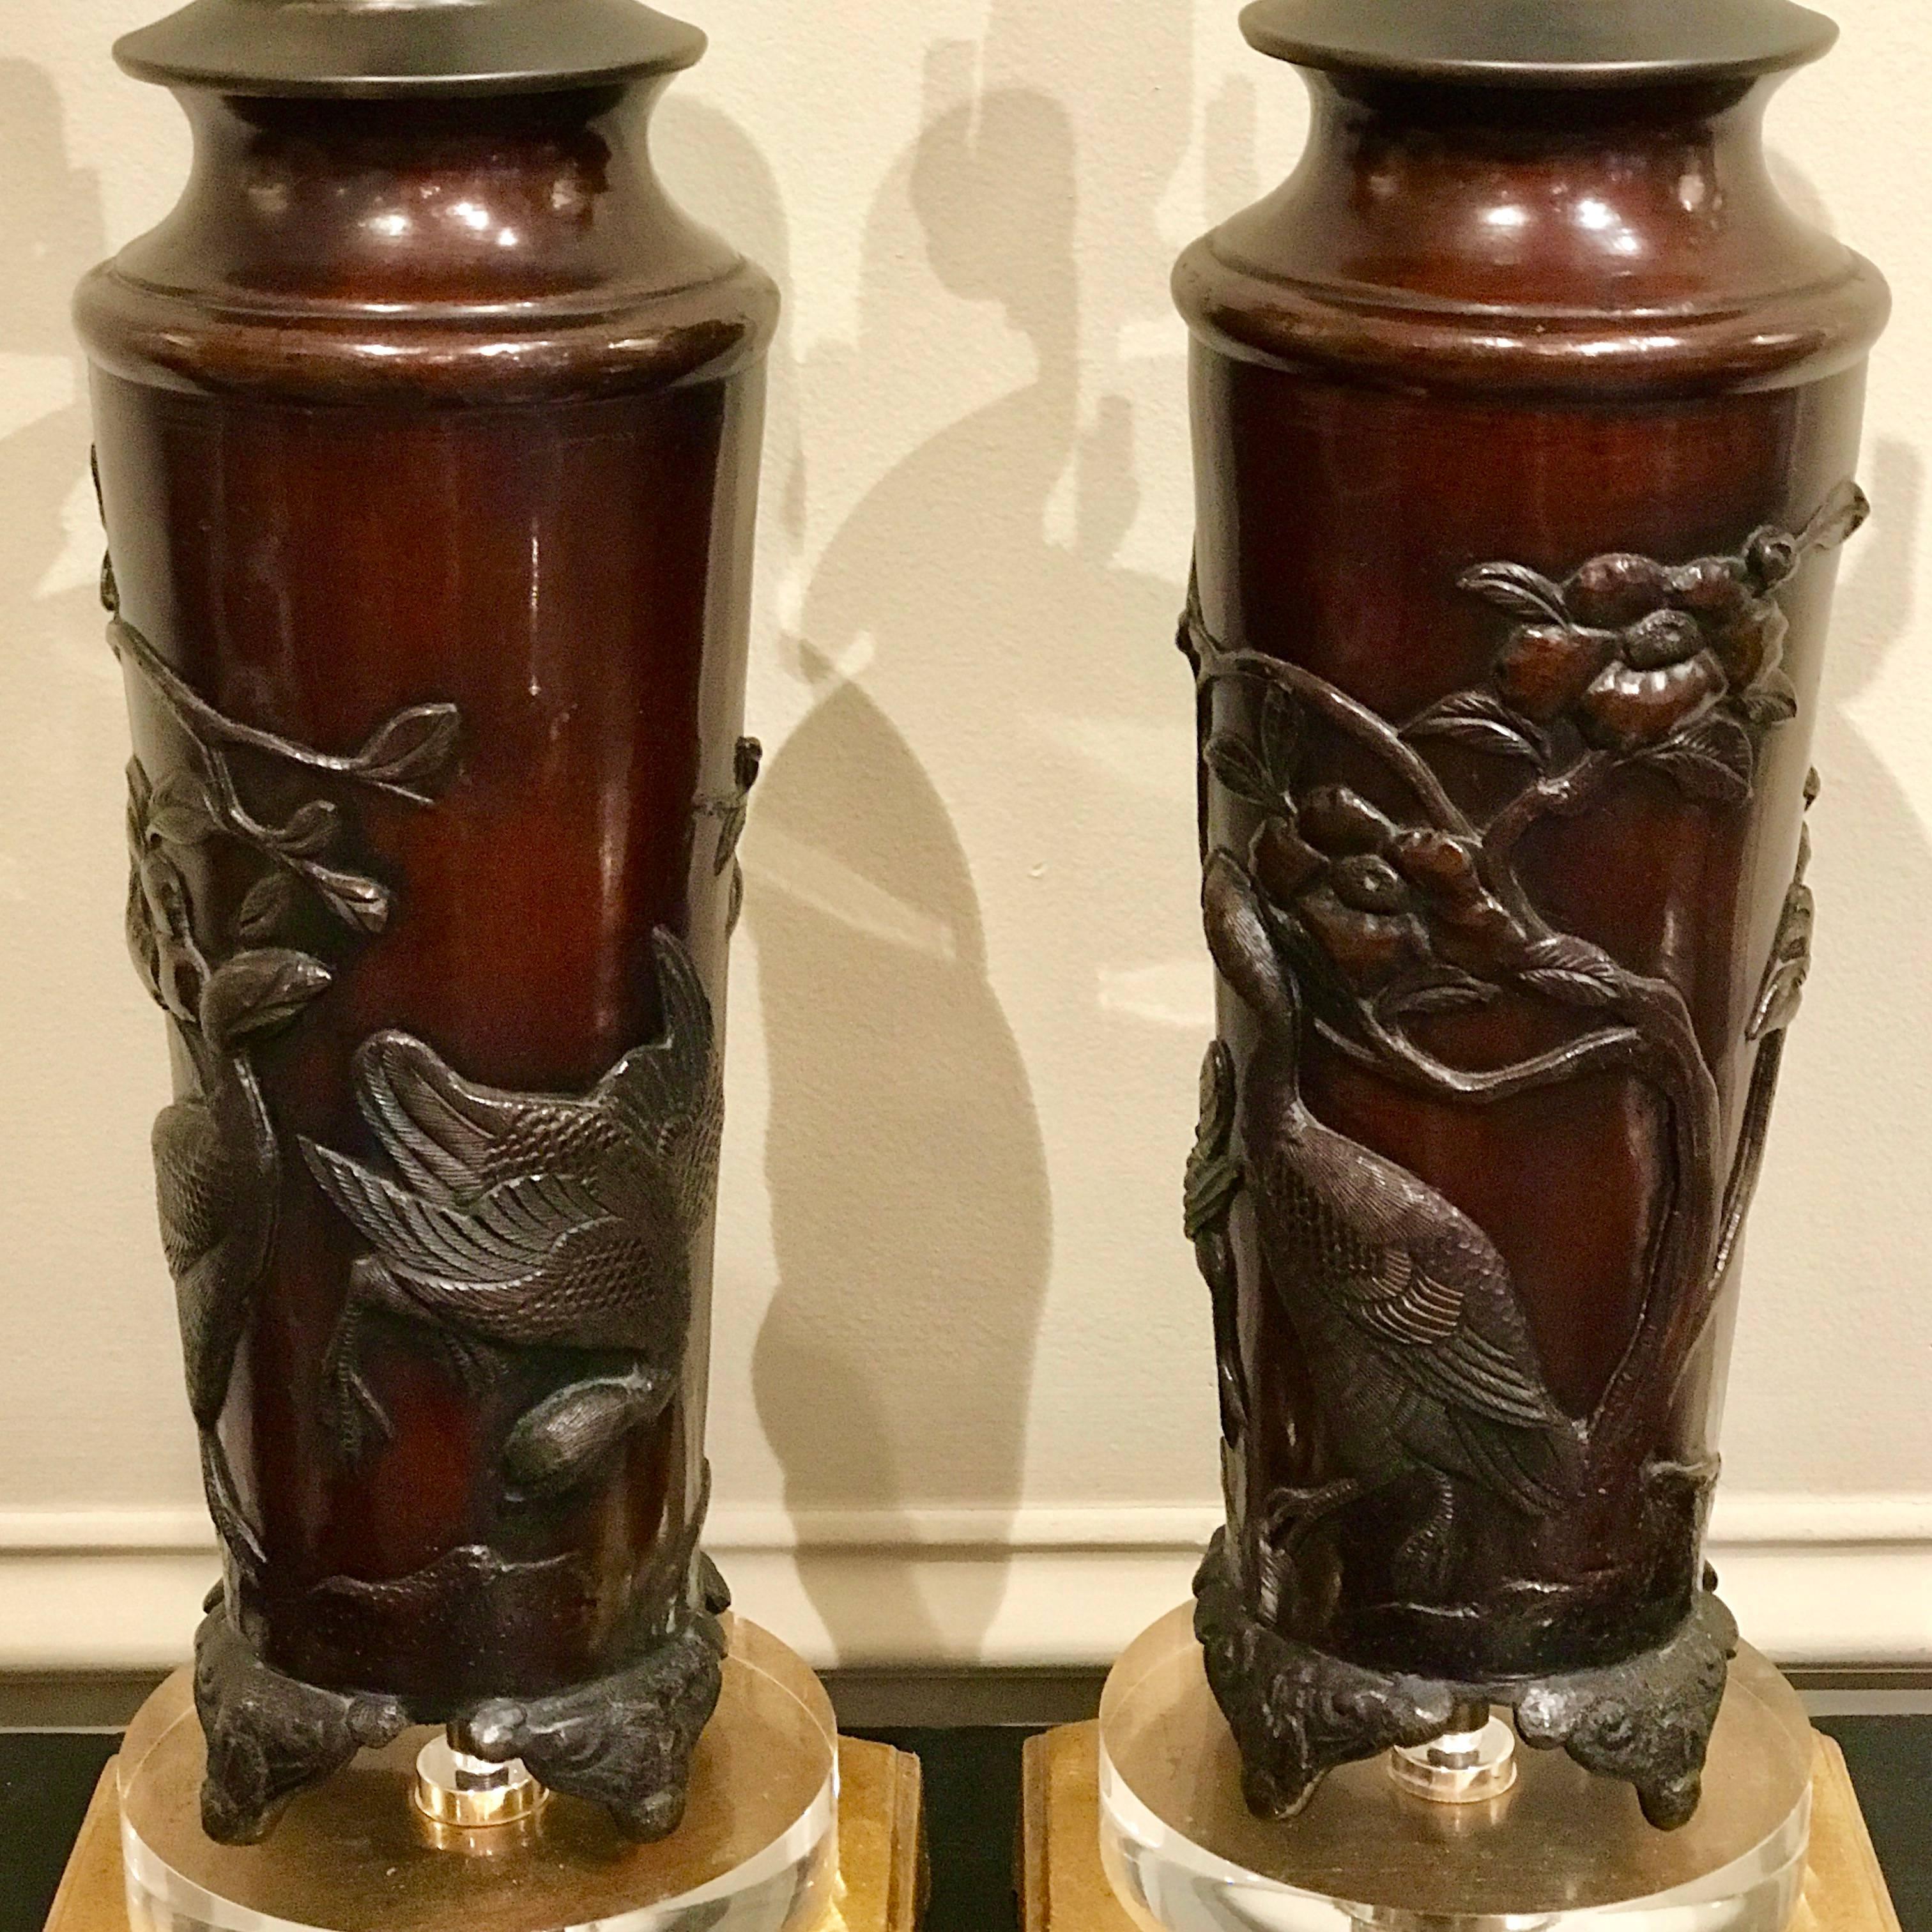 Pair of Chinese bronze bird motif vases, now as lamps, each one with finely chased bird and floral motif, raised on Lucite and giltwood bases. Beautiful rich patina.